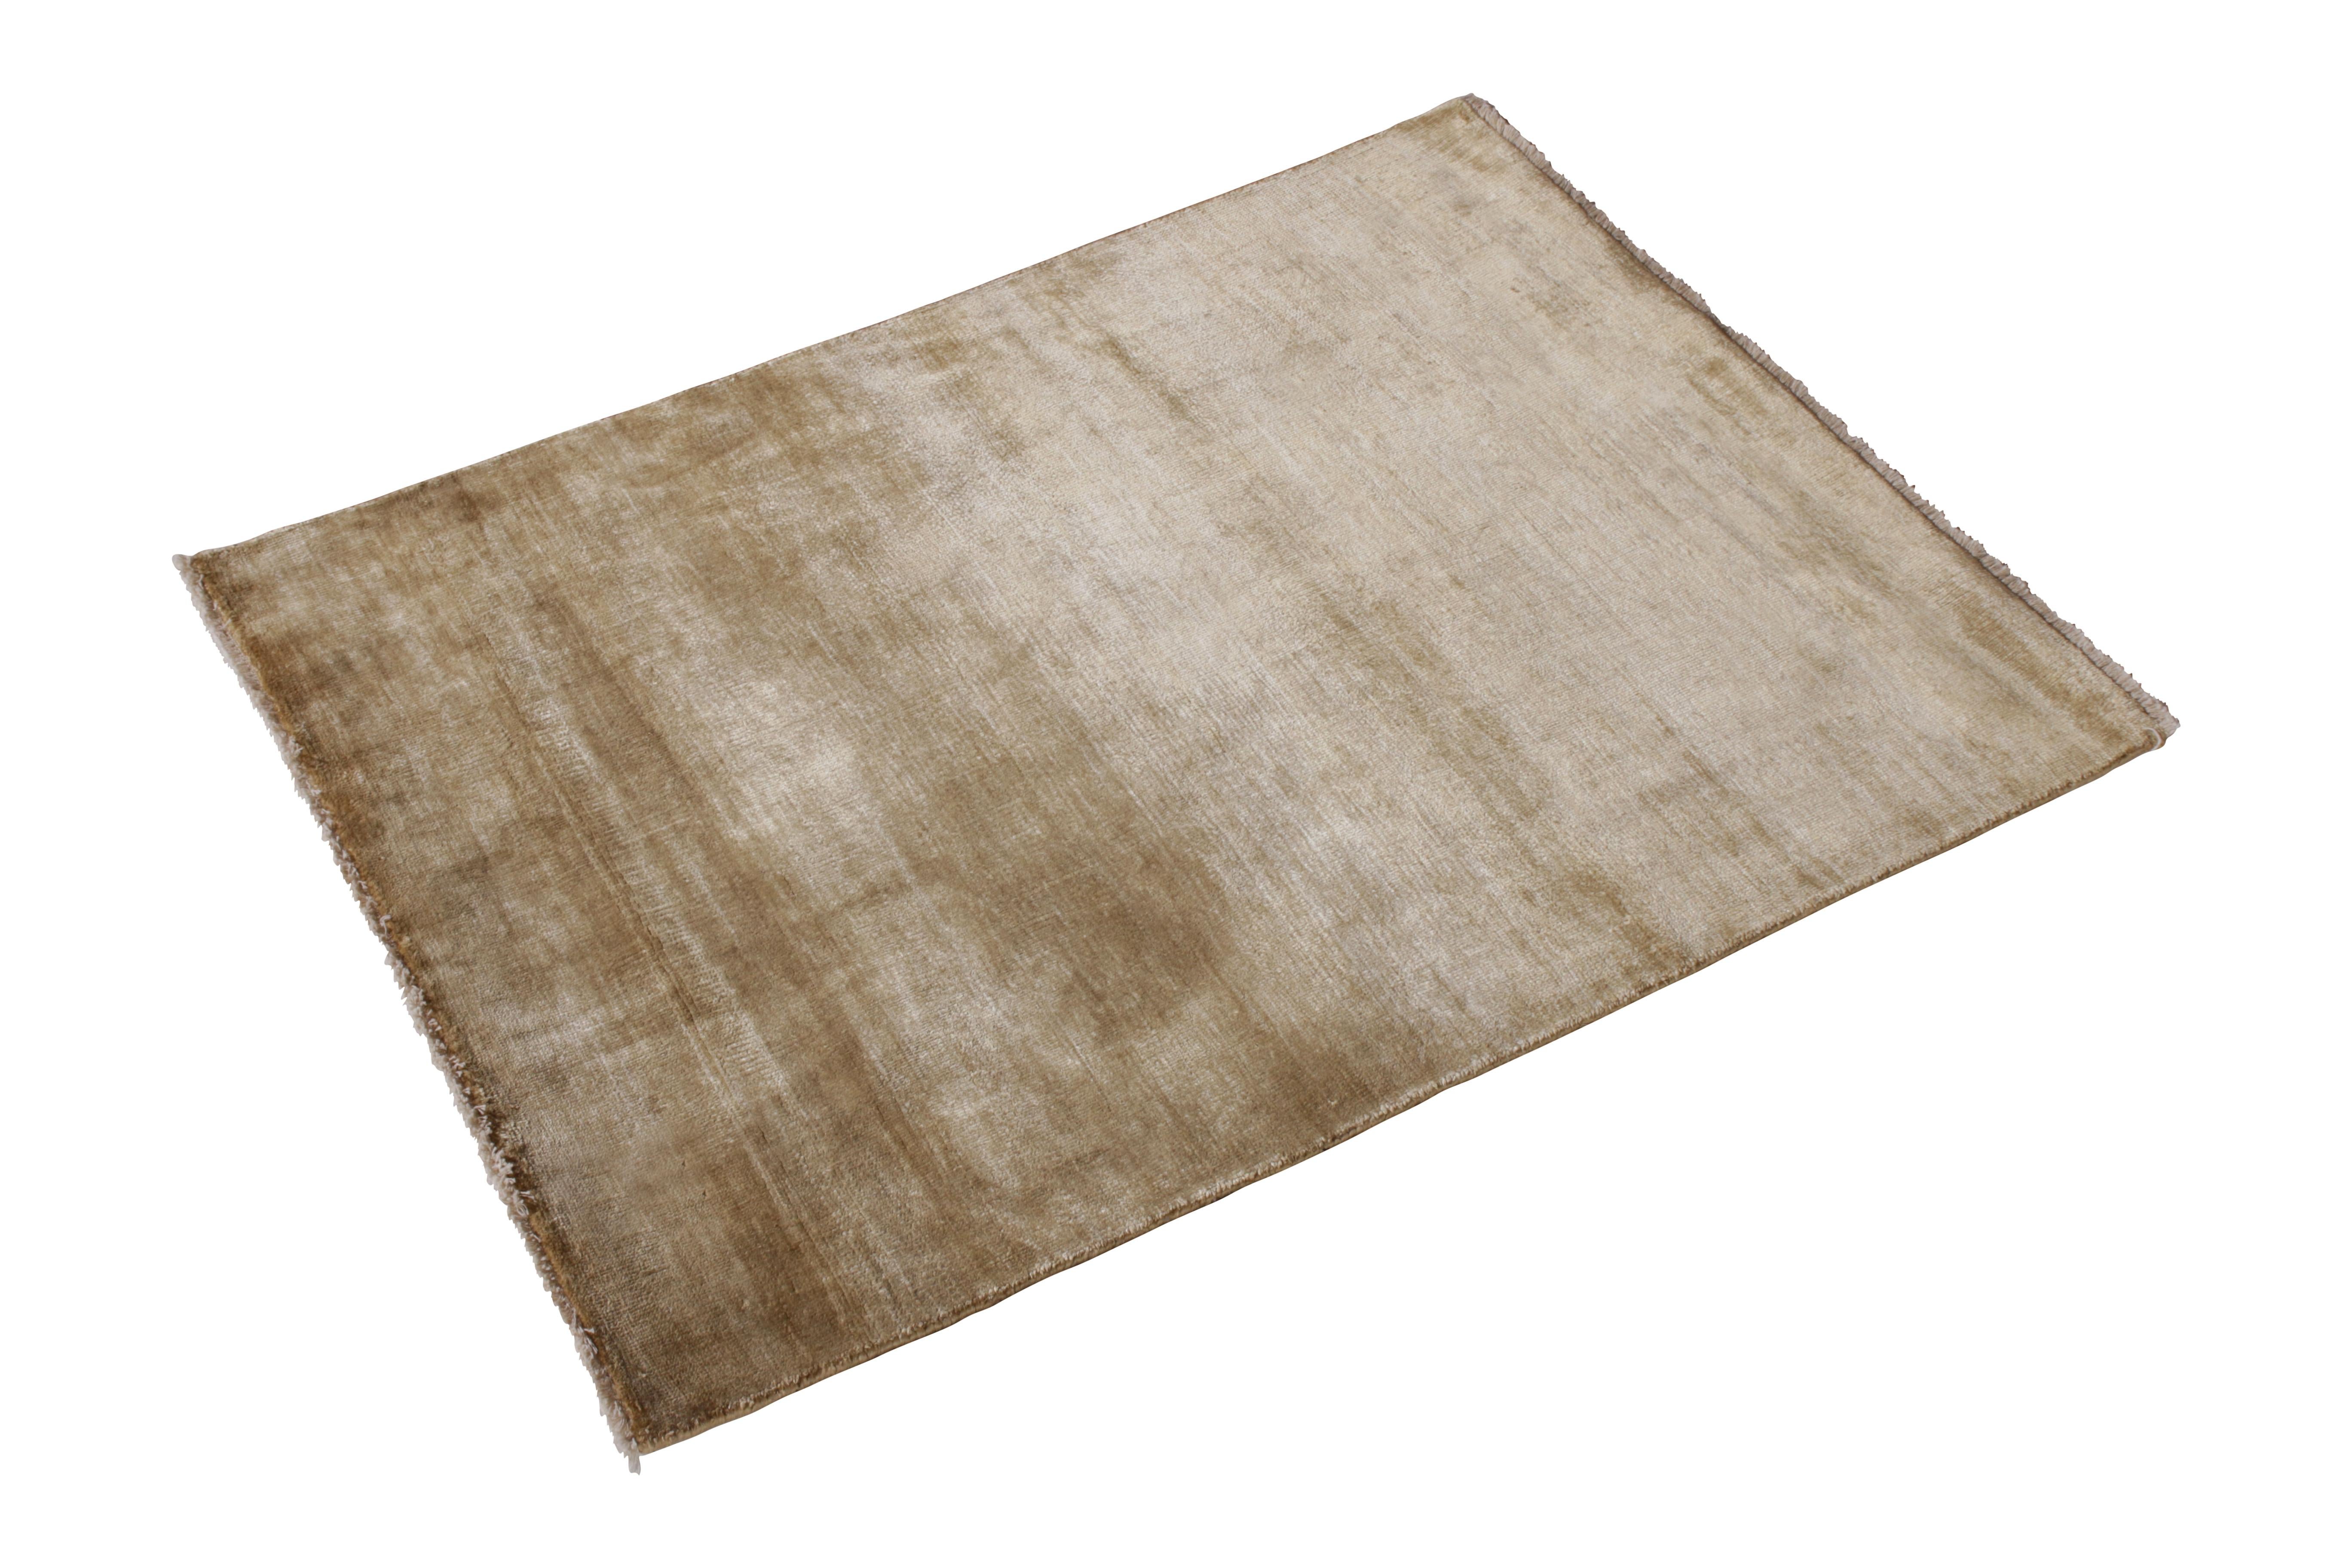 Contemporary Rug in Solid Beige Brown Open Field by Rug & Kilim 
Description: From Rug & Kilim’s Texture of Color Collection, this 2’8x3’3 contemporary rug is hand-knotted with a blend of all-natural and sari silk in this innovation of plain rug